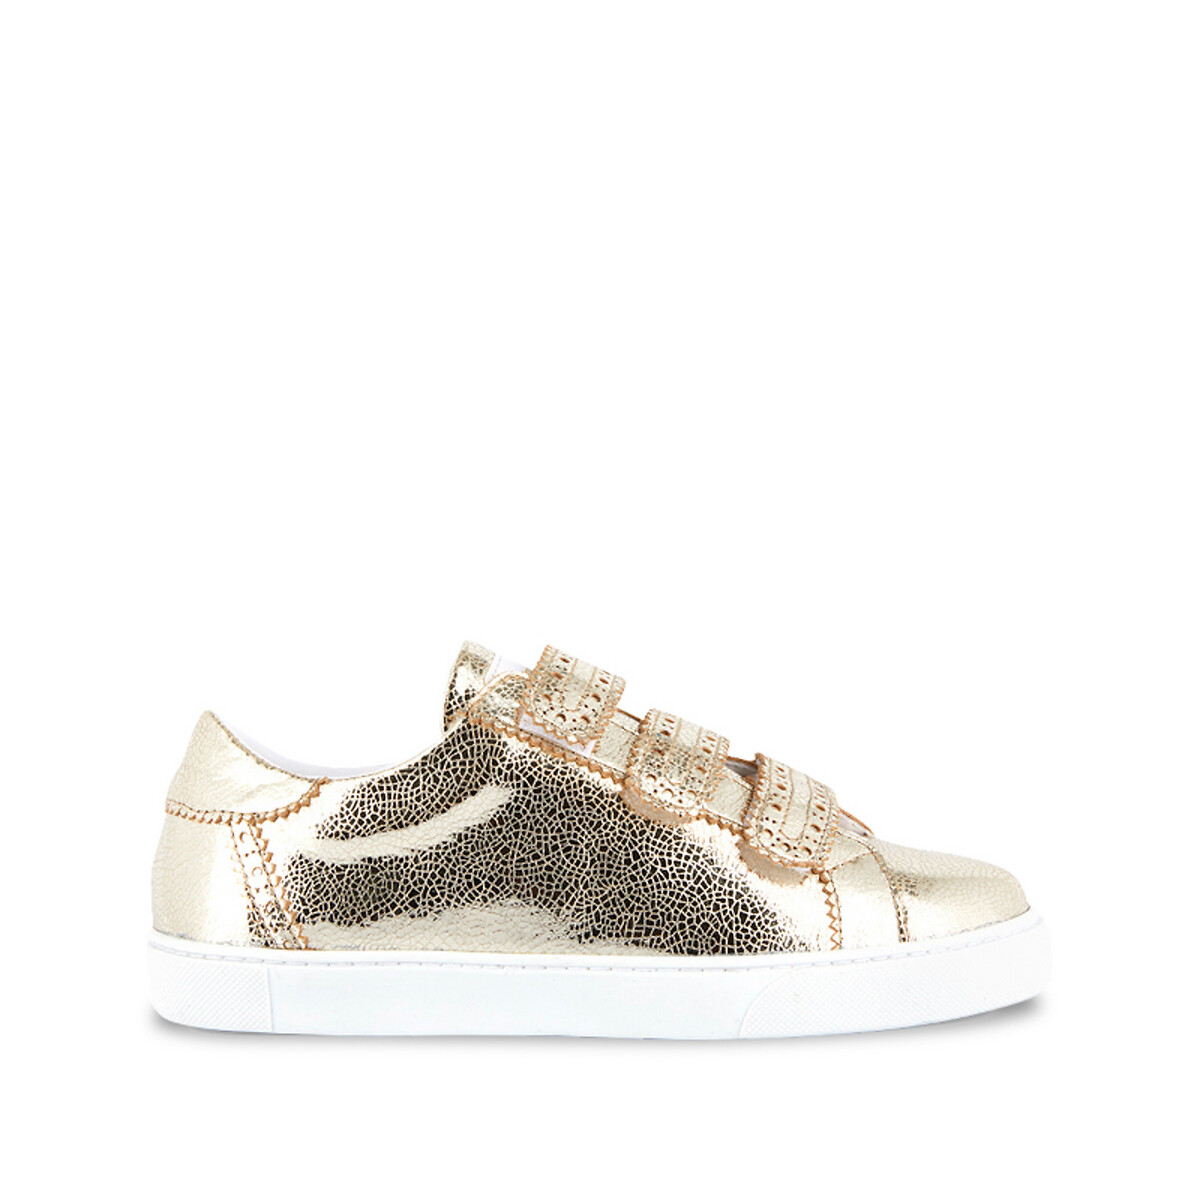 Suzette Leather Trainers